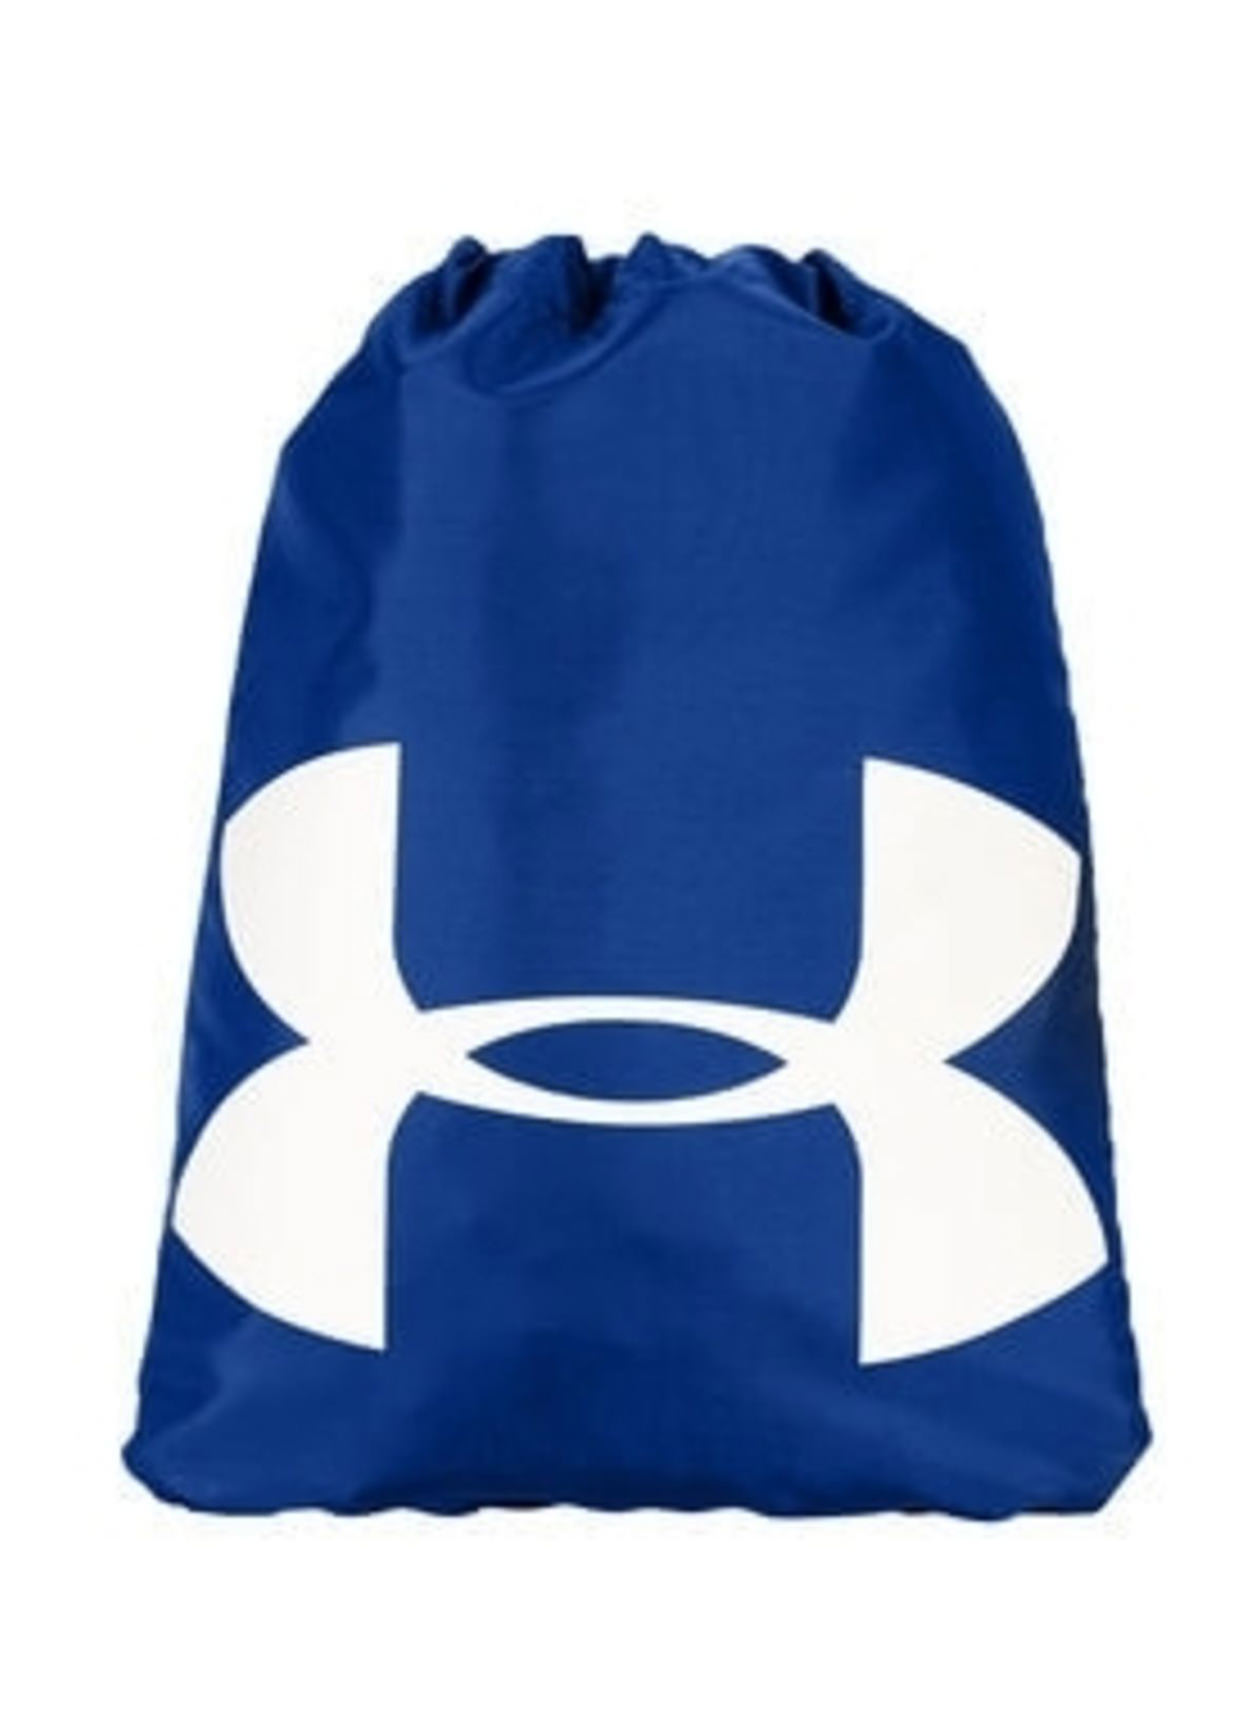 Under Armour ozsee Sackpack Royal